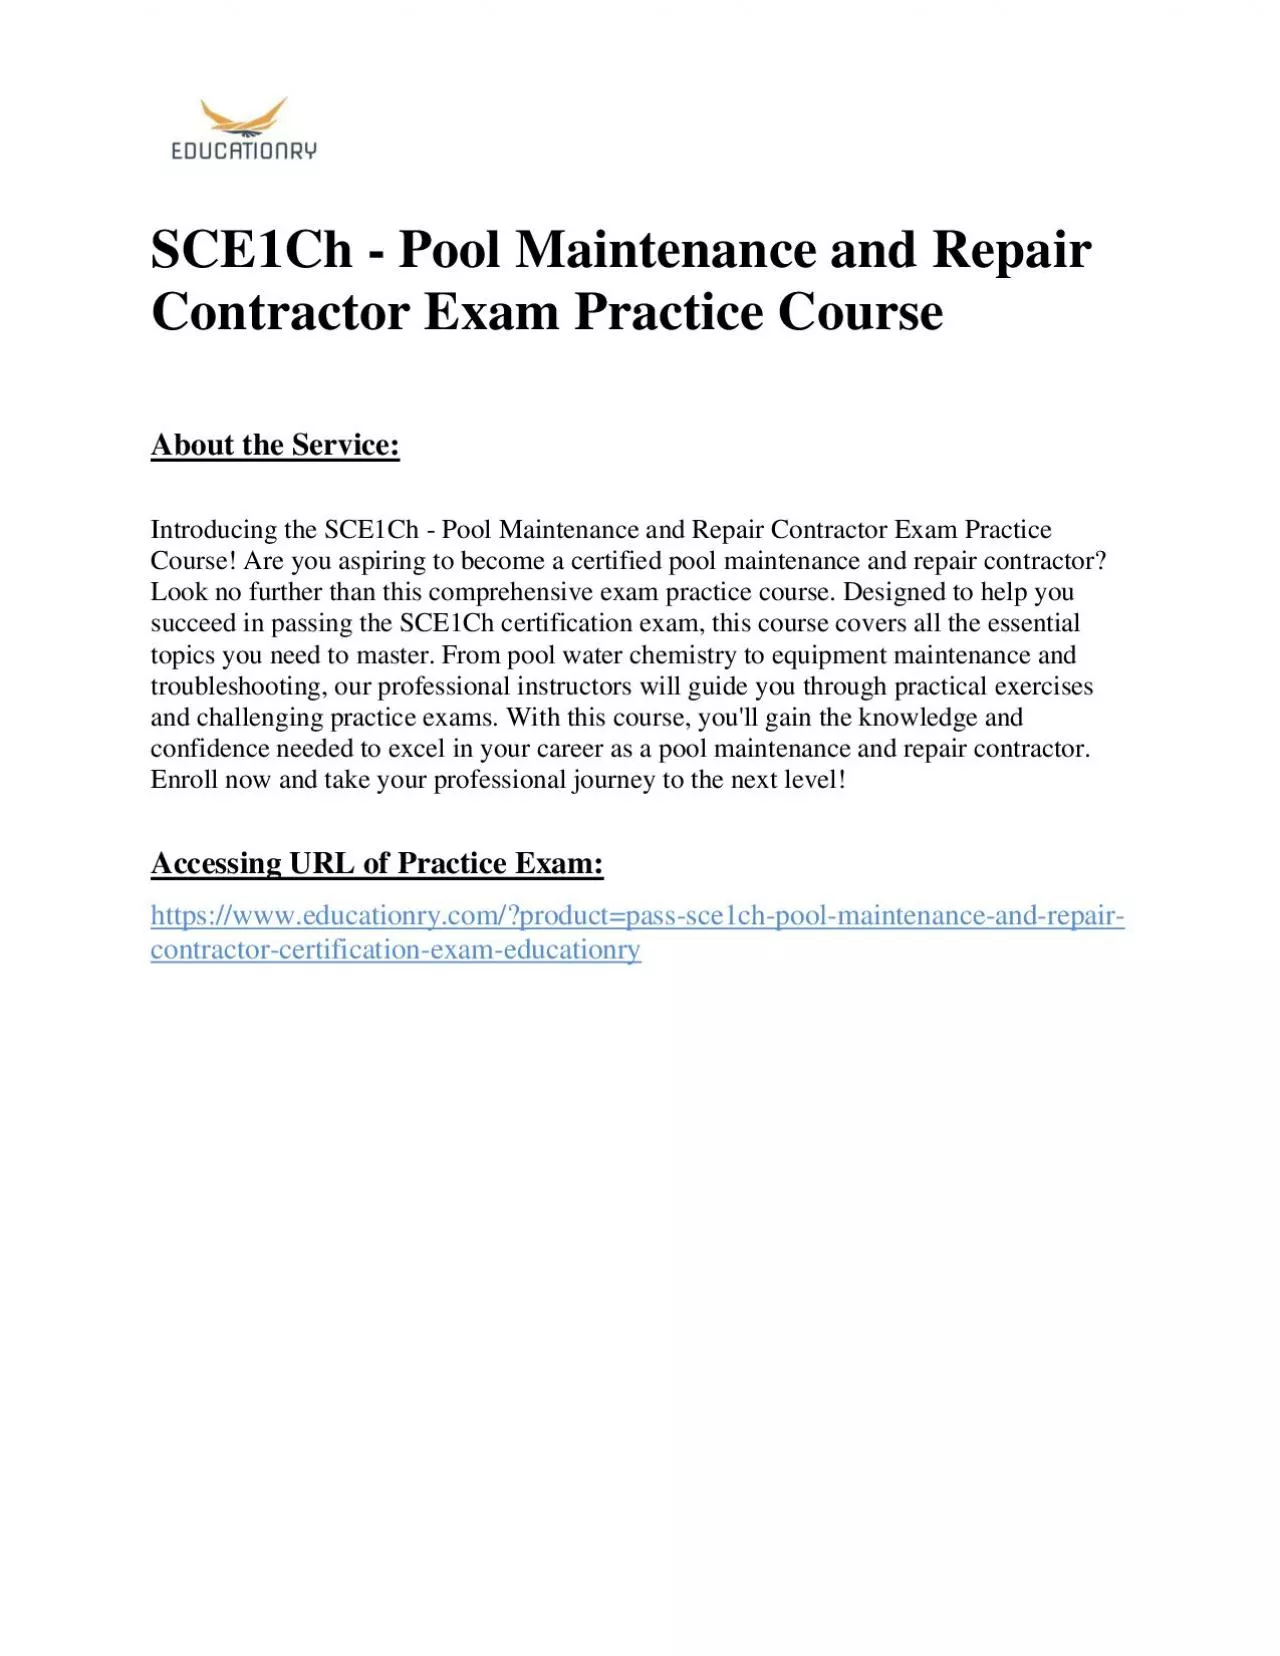 SCE1Ch - Pool Maintenance and Repair Contractor Exam Practice Course